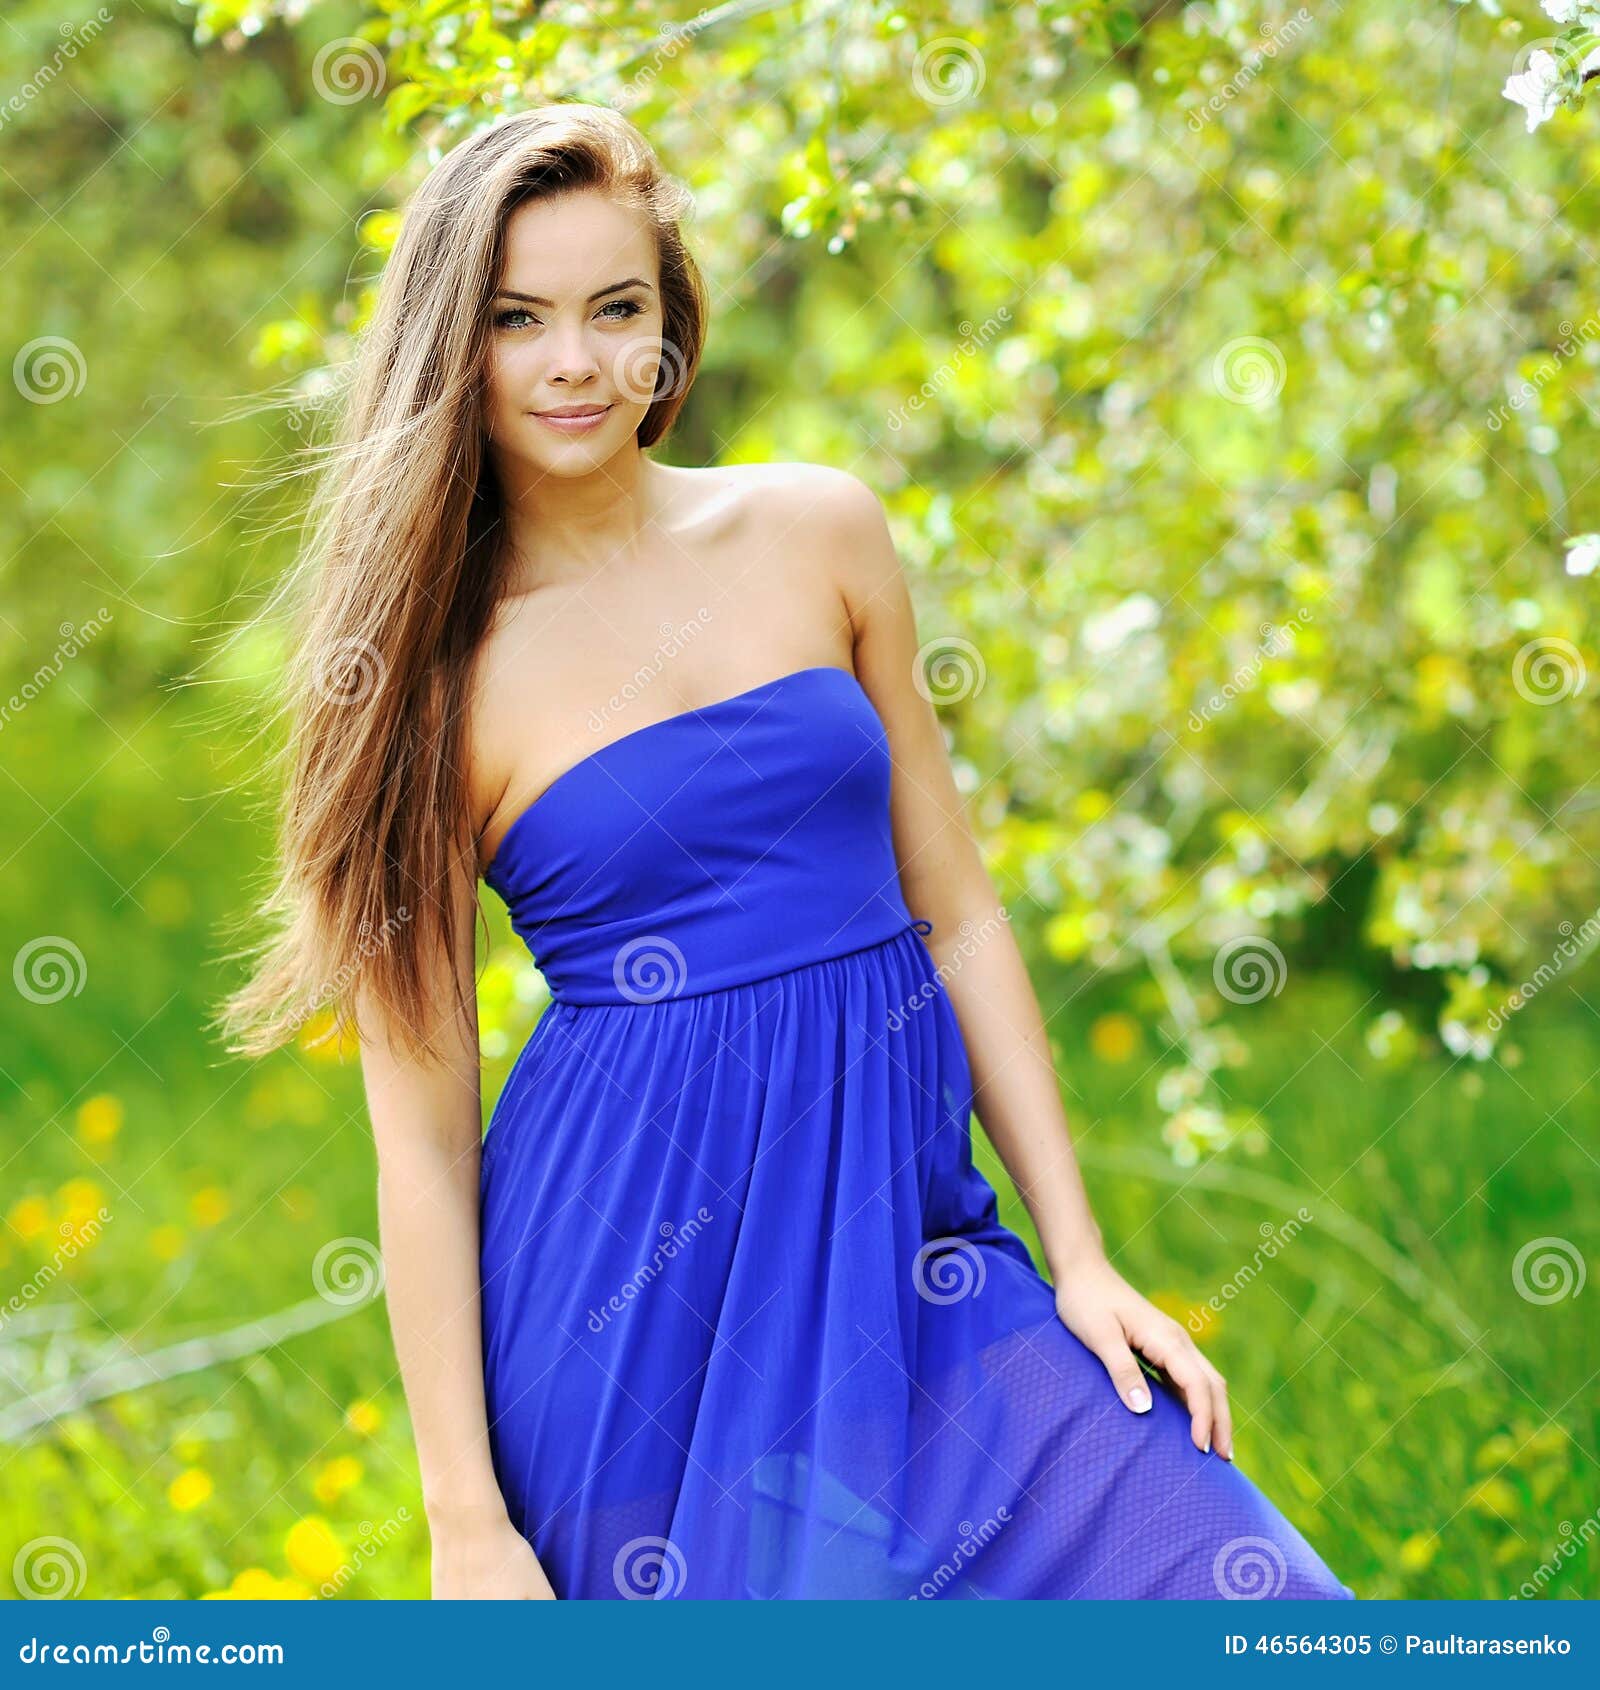 Beautiful Girl in the Garden on a Sunny Day Stock Image - Image of lady ...